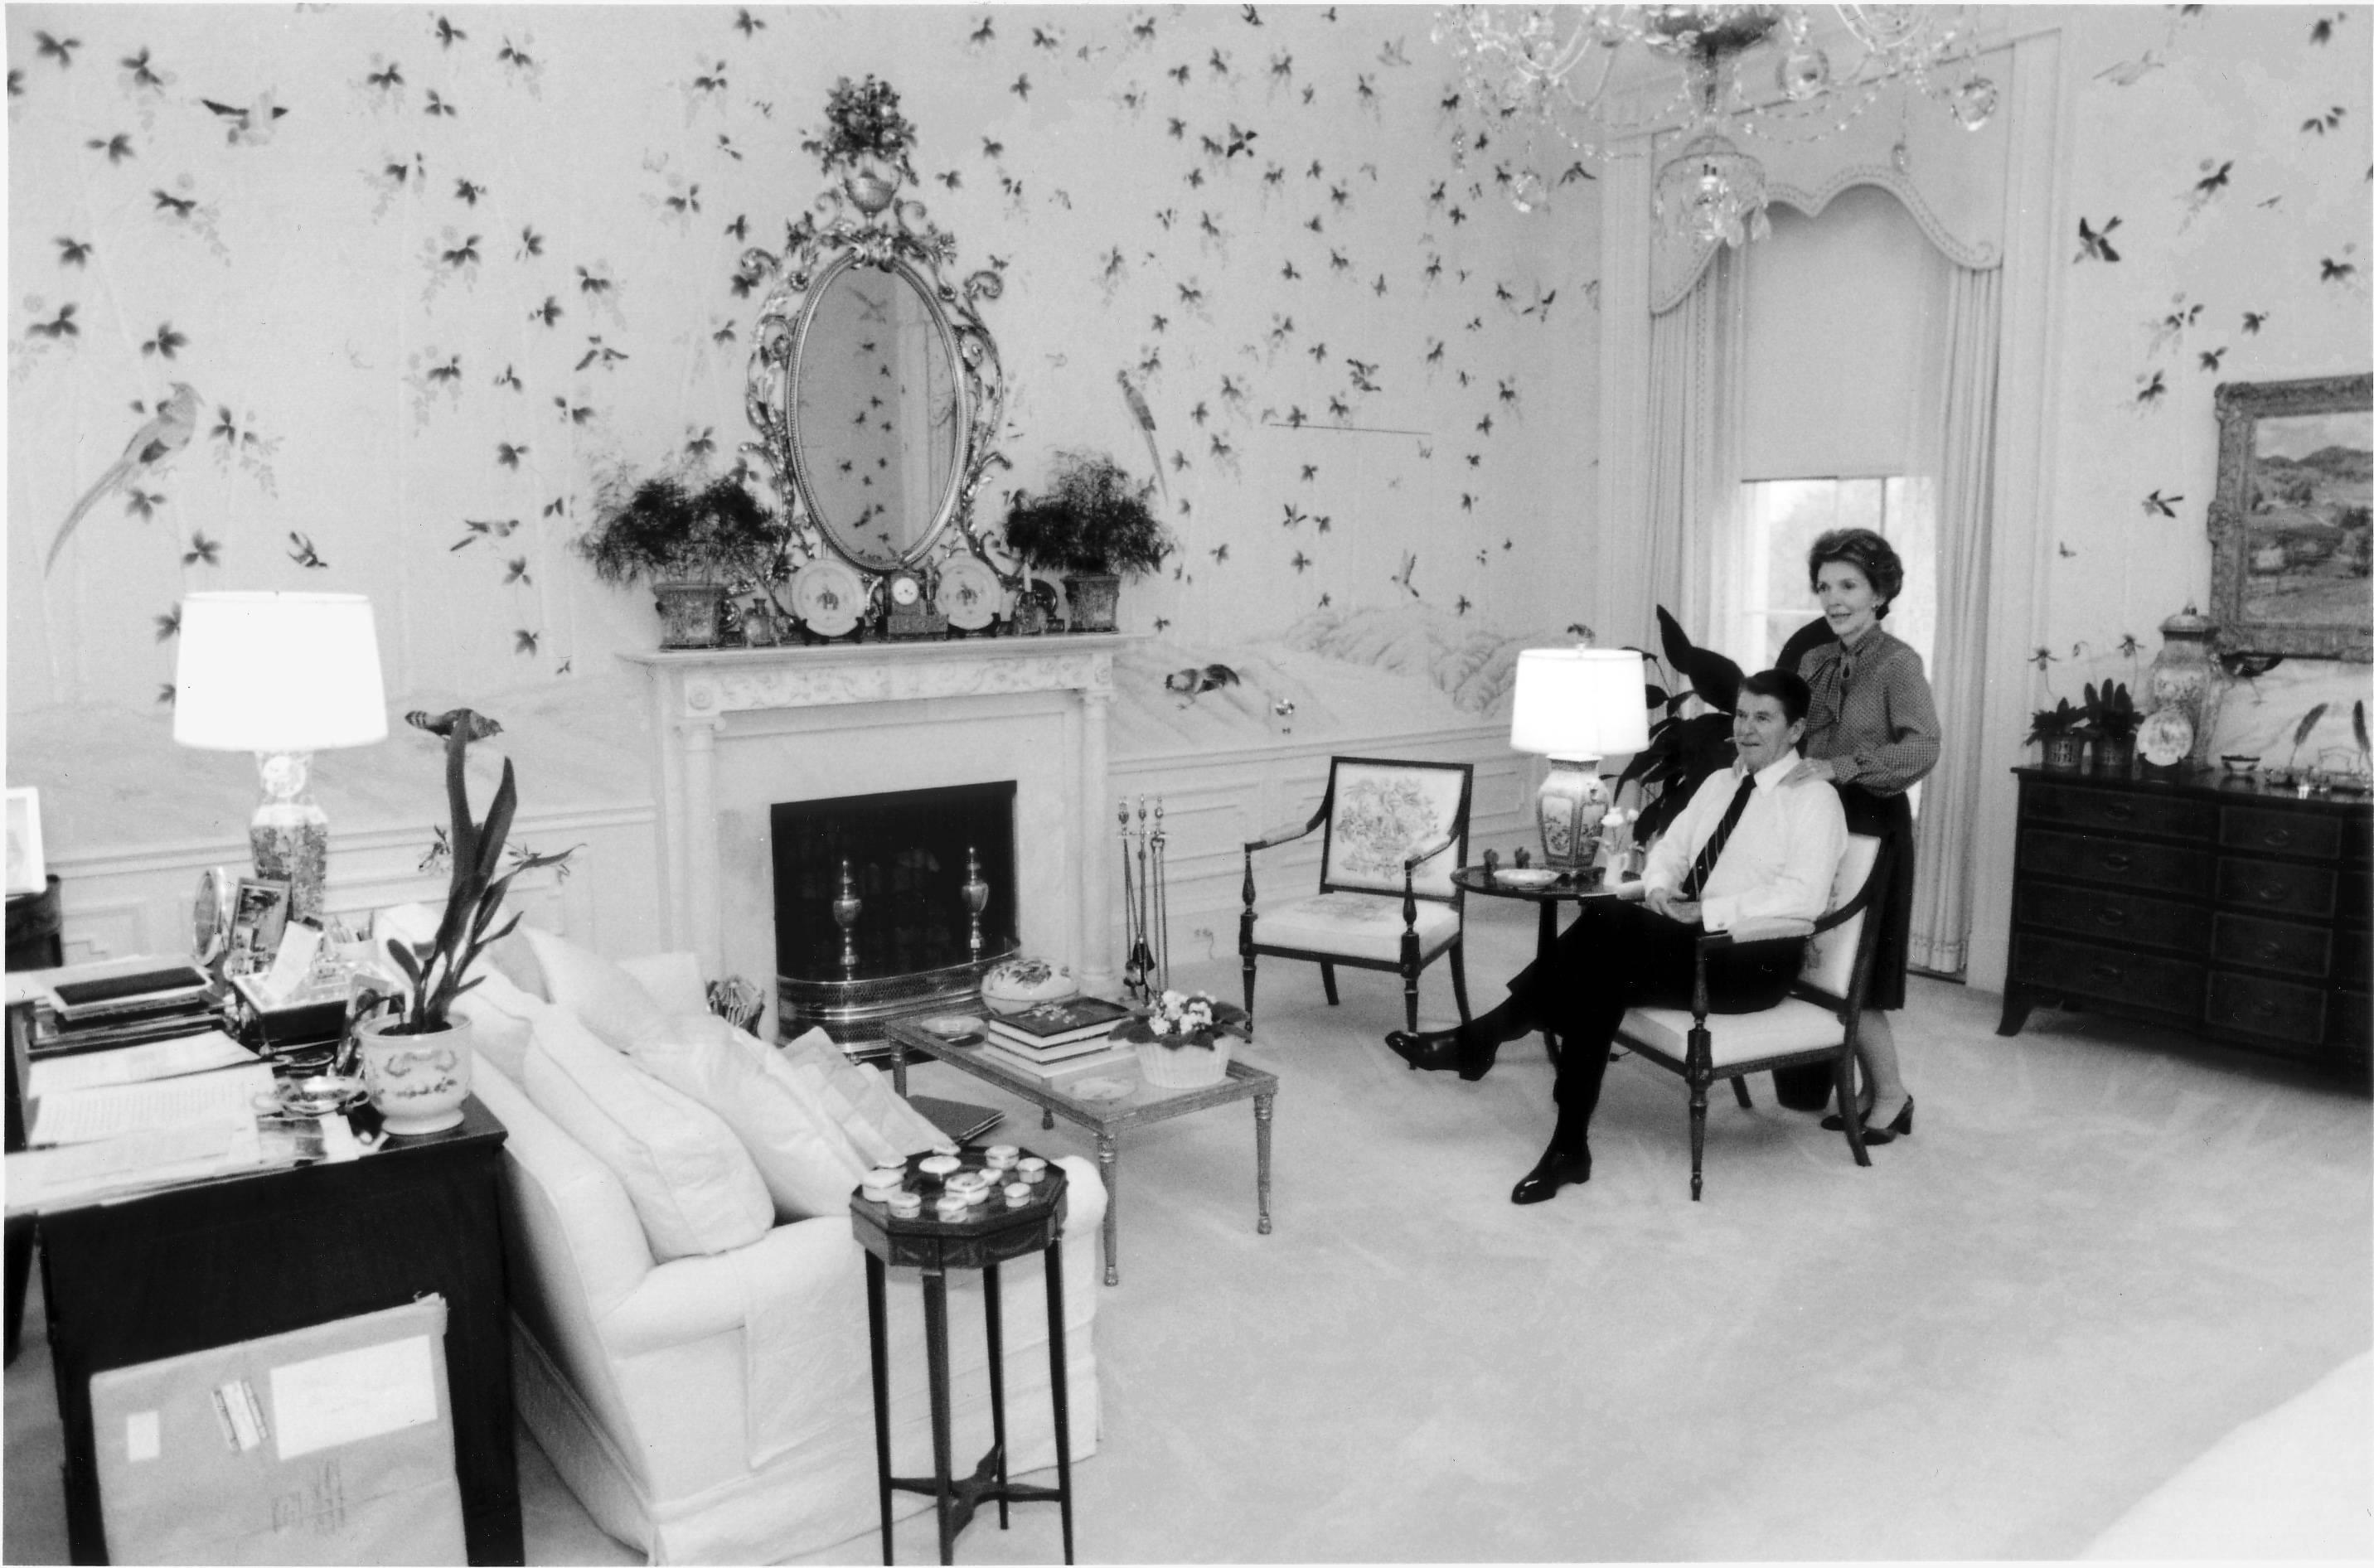 Reagans in their White House Bedroom